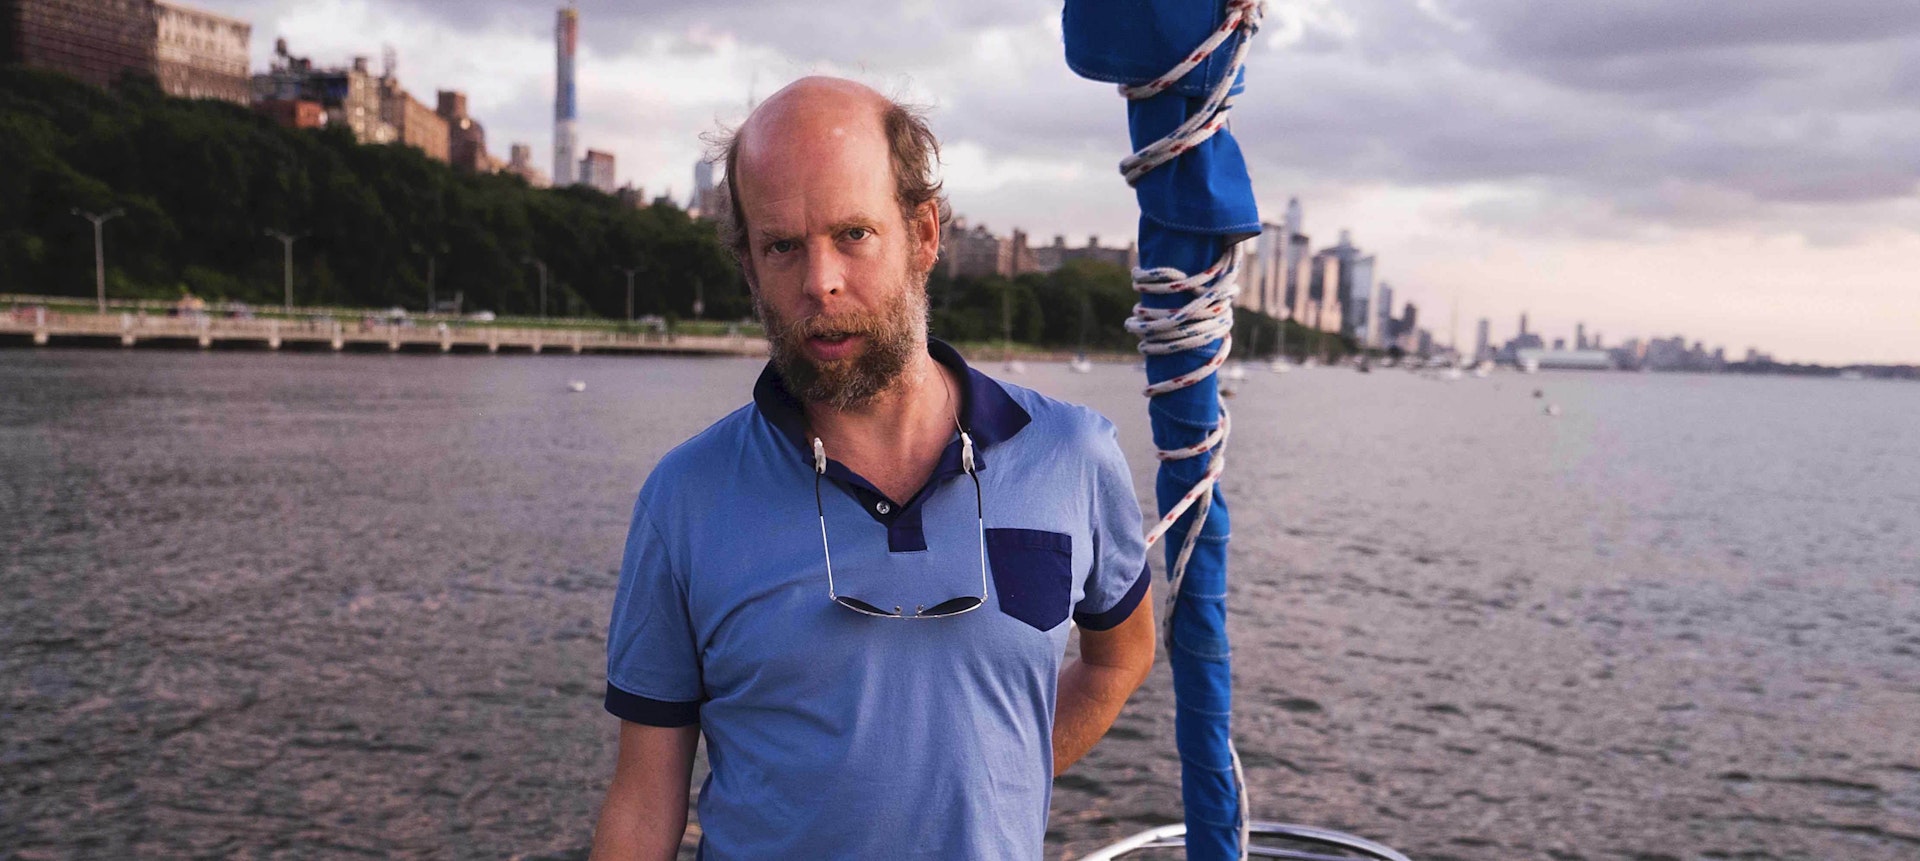 Bonnie ‘Prince’ Billy would take a nuclear attack pretty well